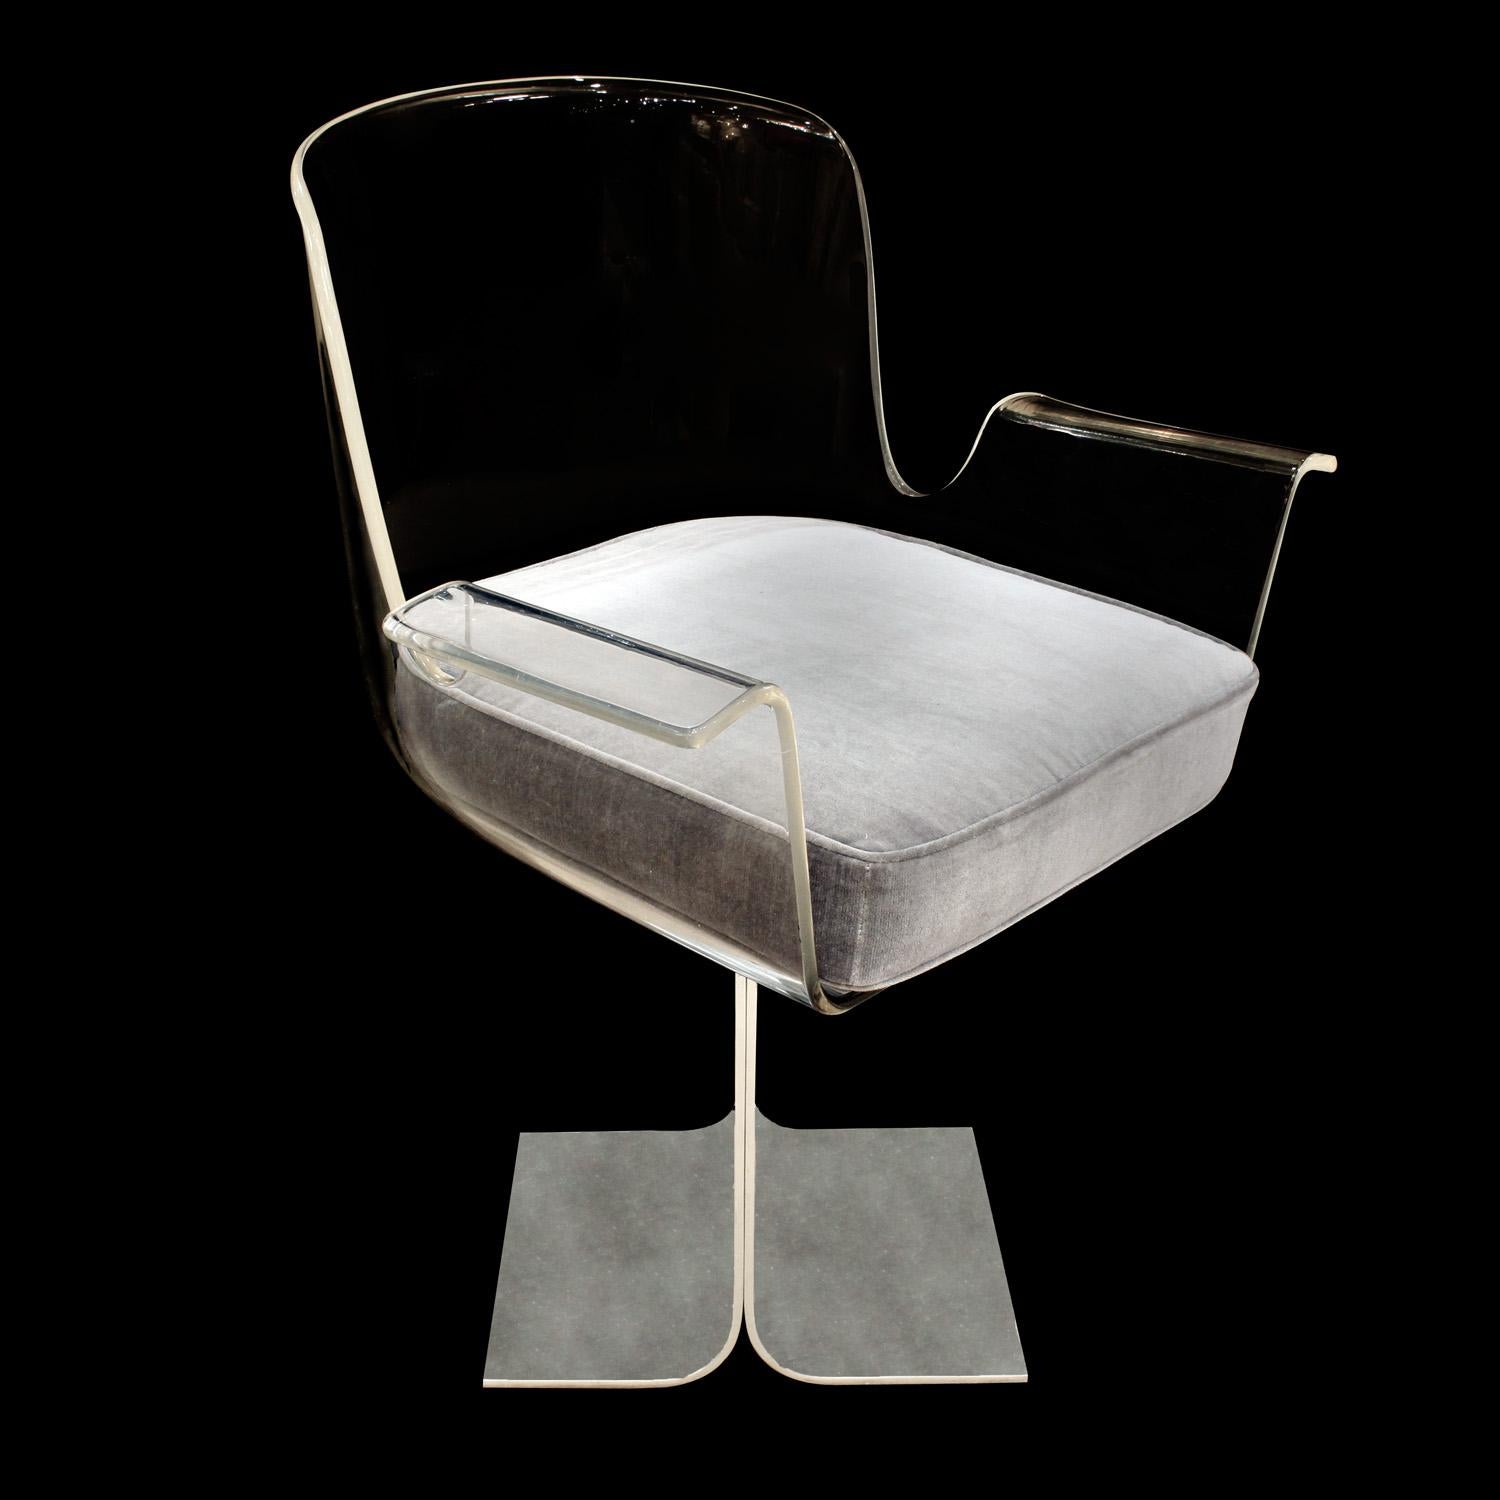 Hand-Crafted Pace Collection Desk Chair With Swiveling Lucite Seat 1970s